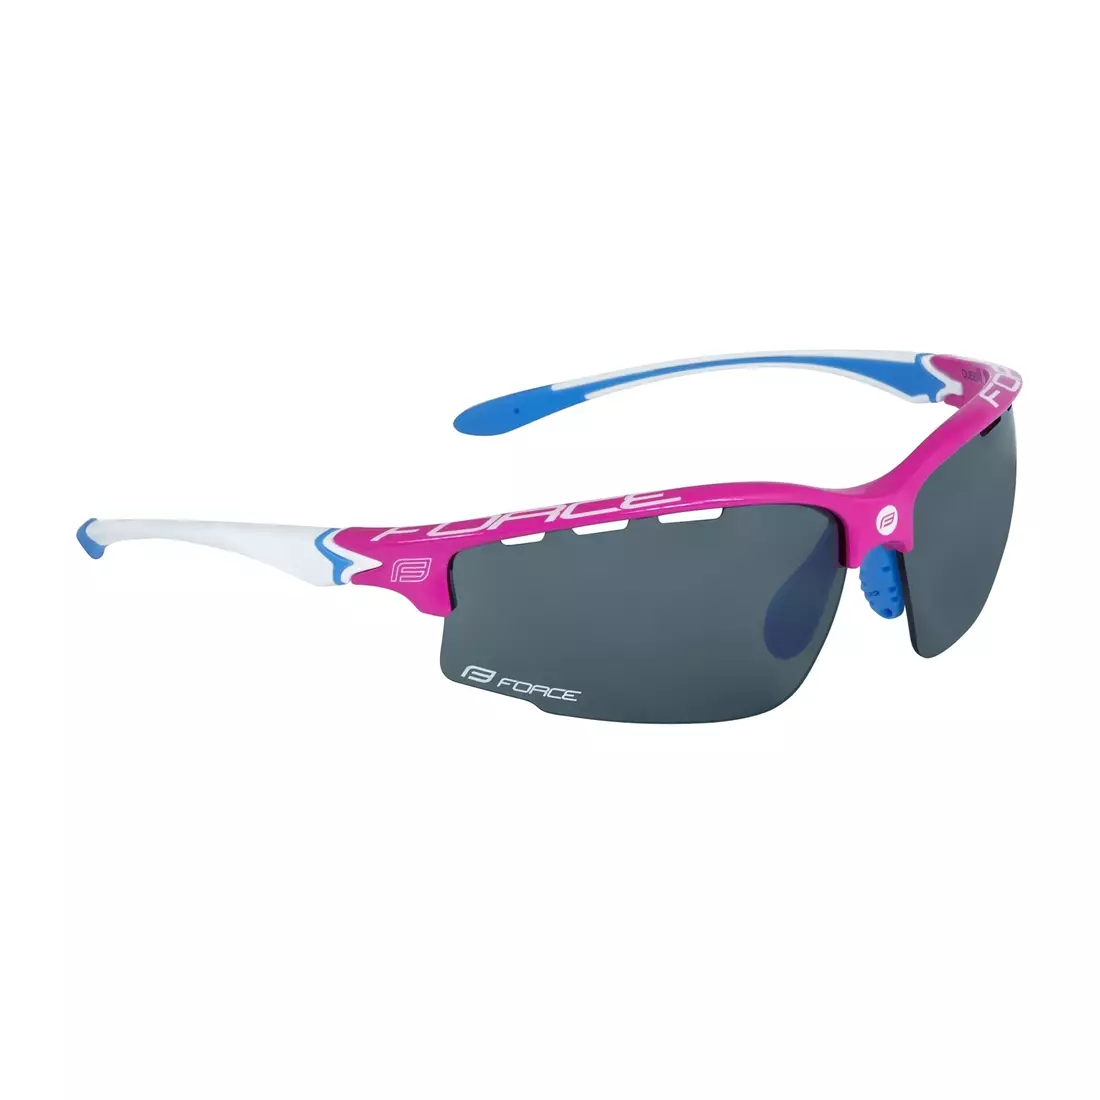 FORCE QUEEN Pink-white, black laser glasses 91060